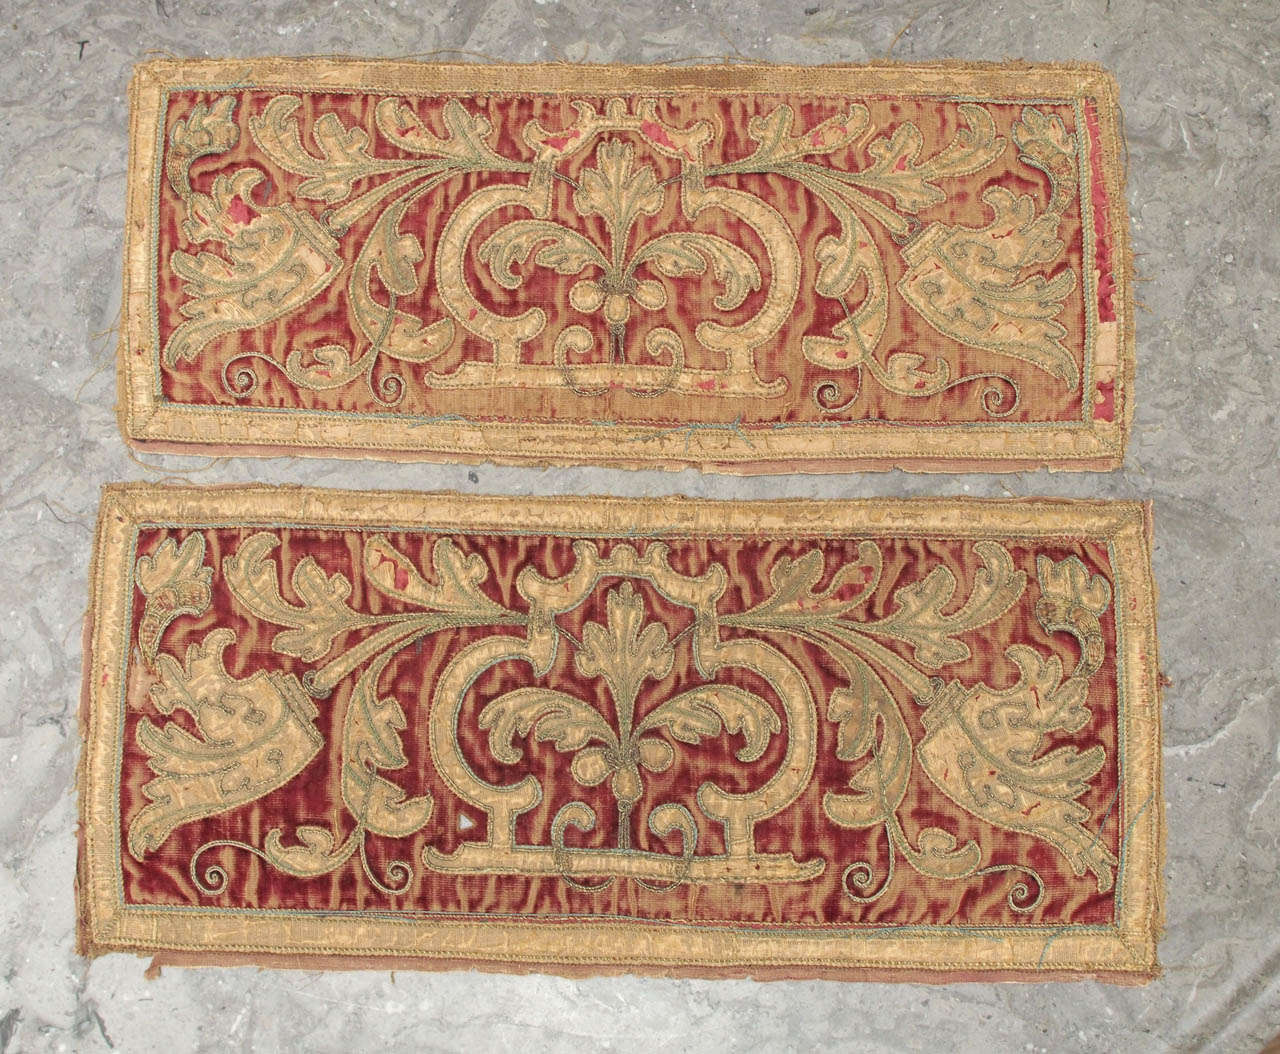 A pair of religious silk embroidered applique panels from the Renaissance era. These would be stunning appliqued onto cushions.